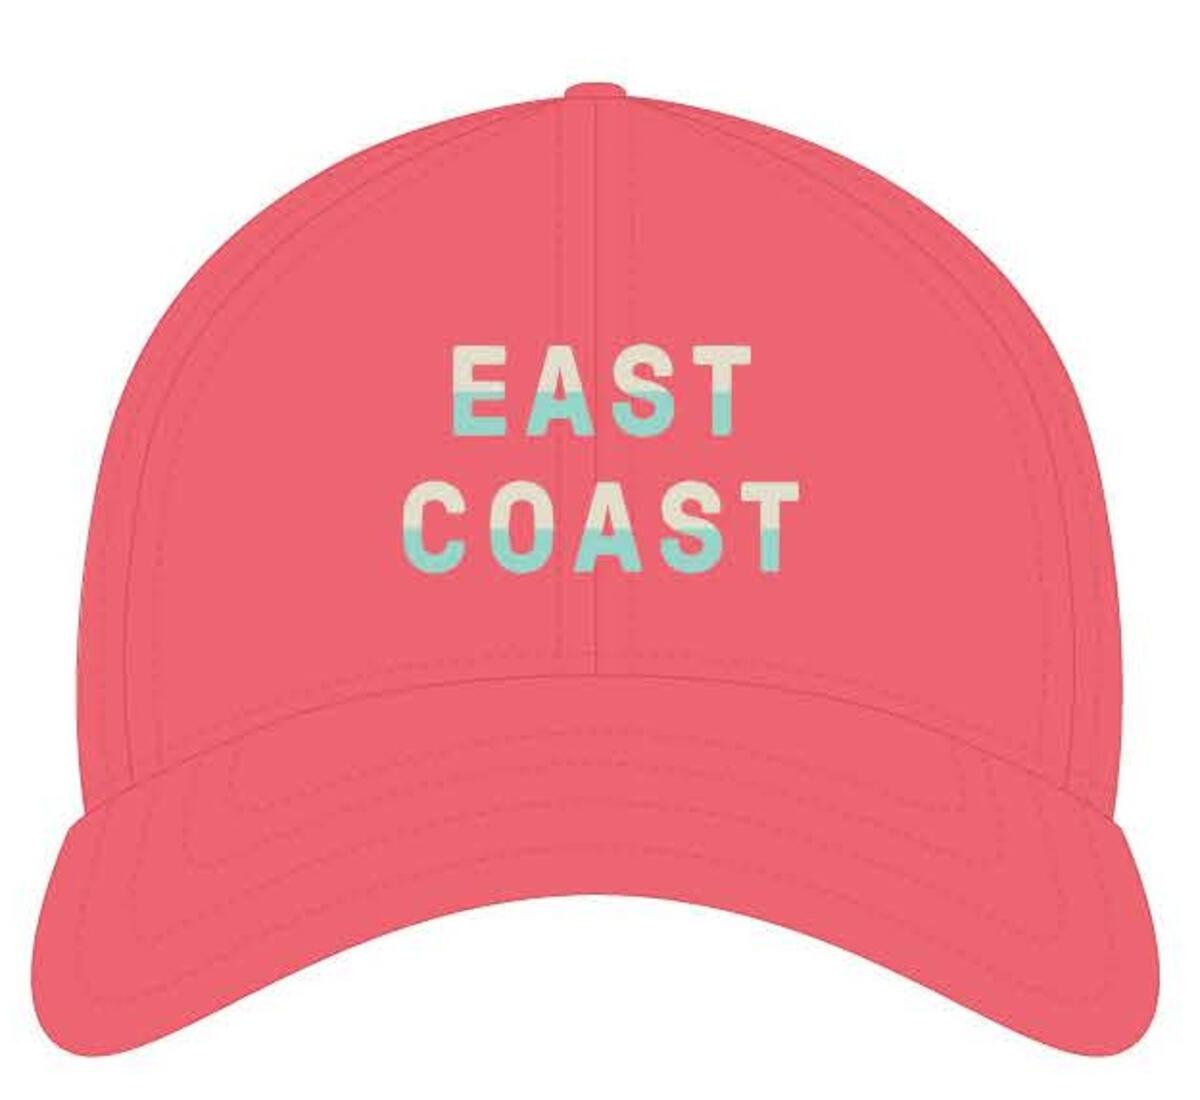 East Coast on New England Red Hat